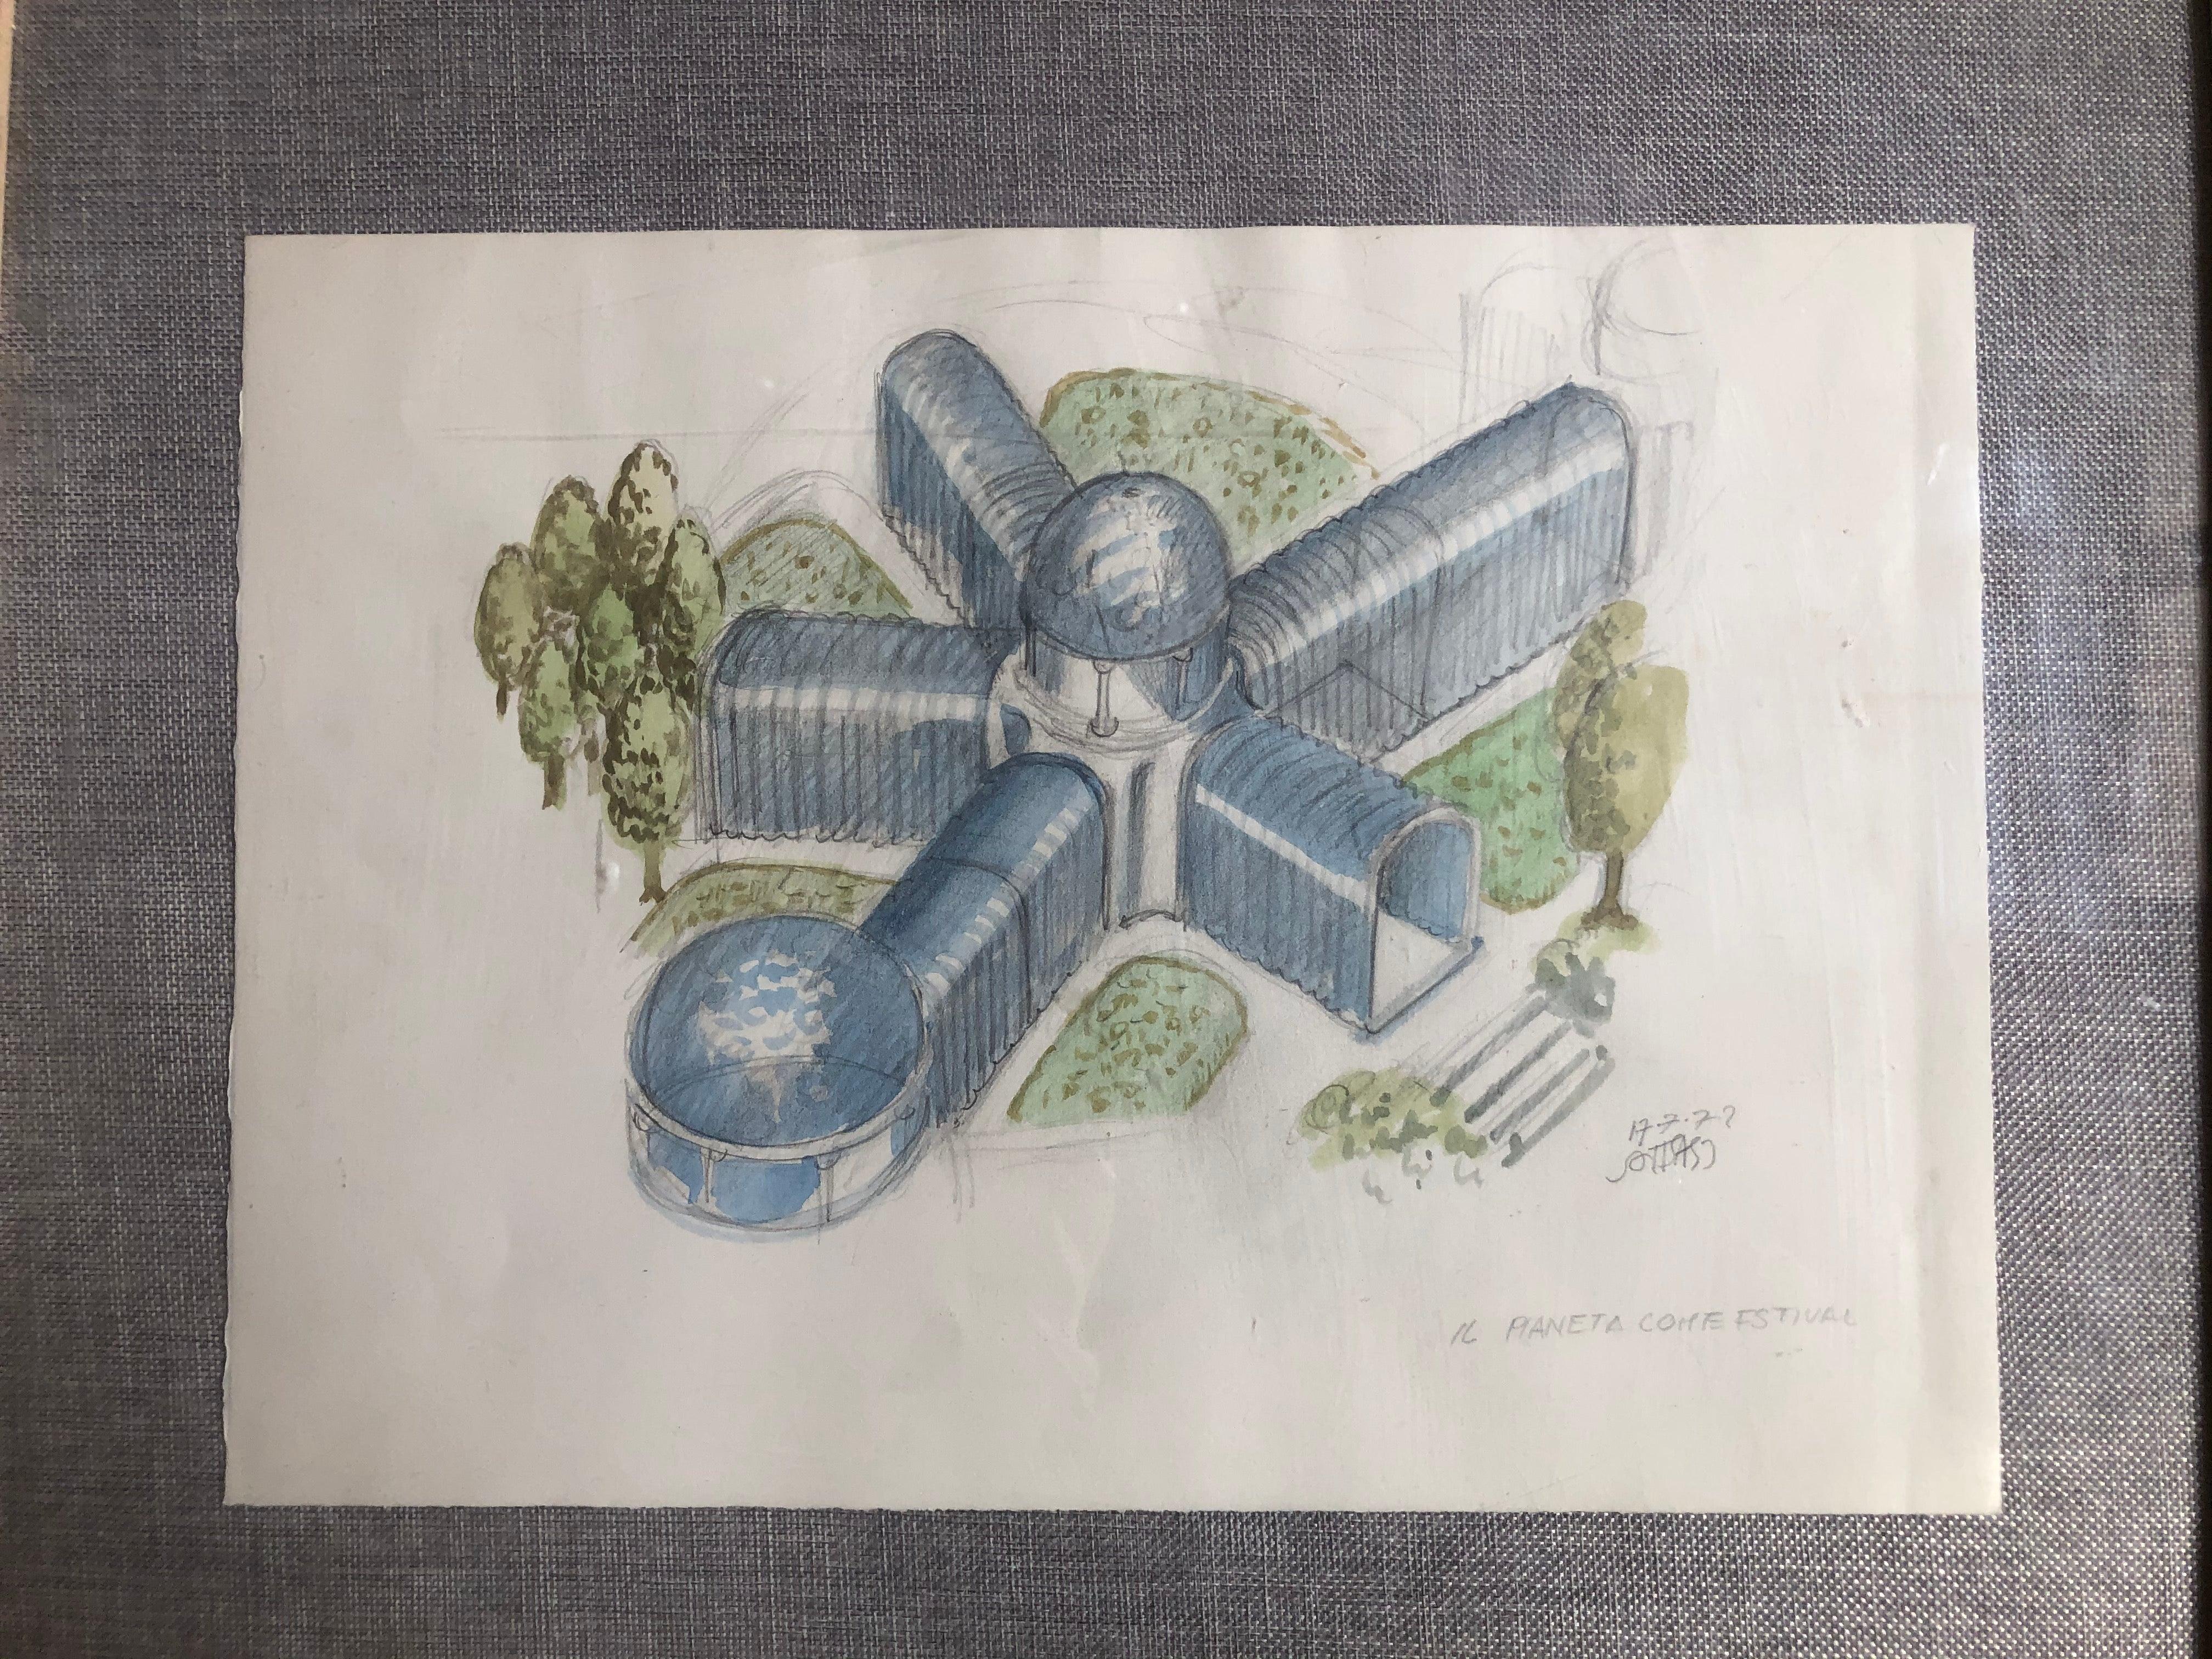 Original drawing by the famous Italian designer Ettore Sottsass
1972. Hand signed
Pencil and watercolor
Very good condition
Sizes: A3 (30 x 42 cm).